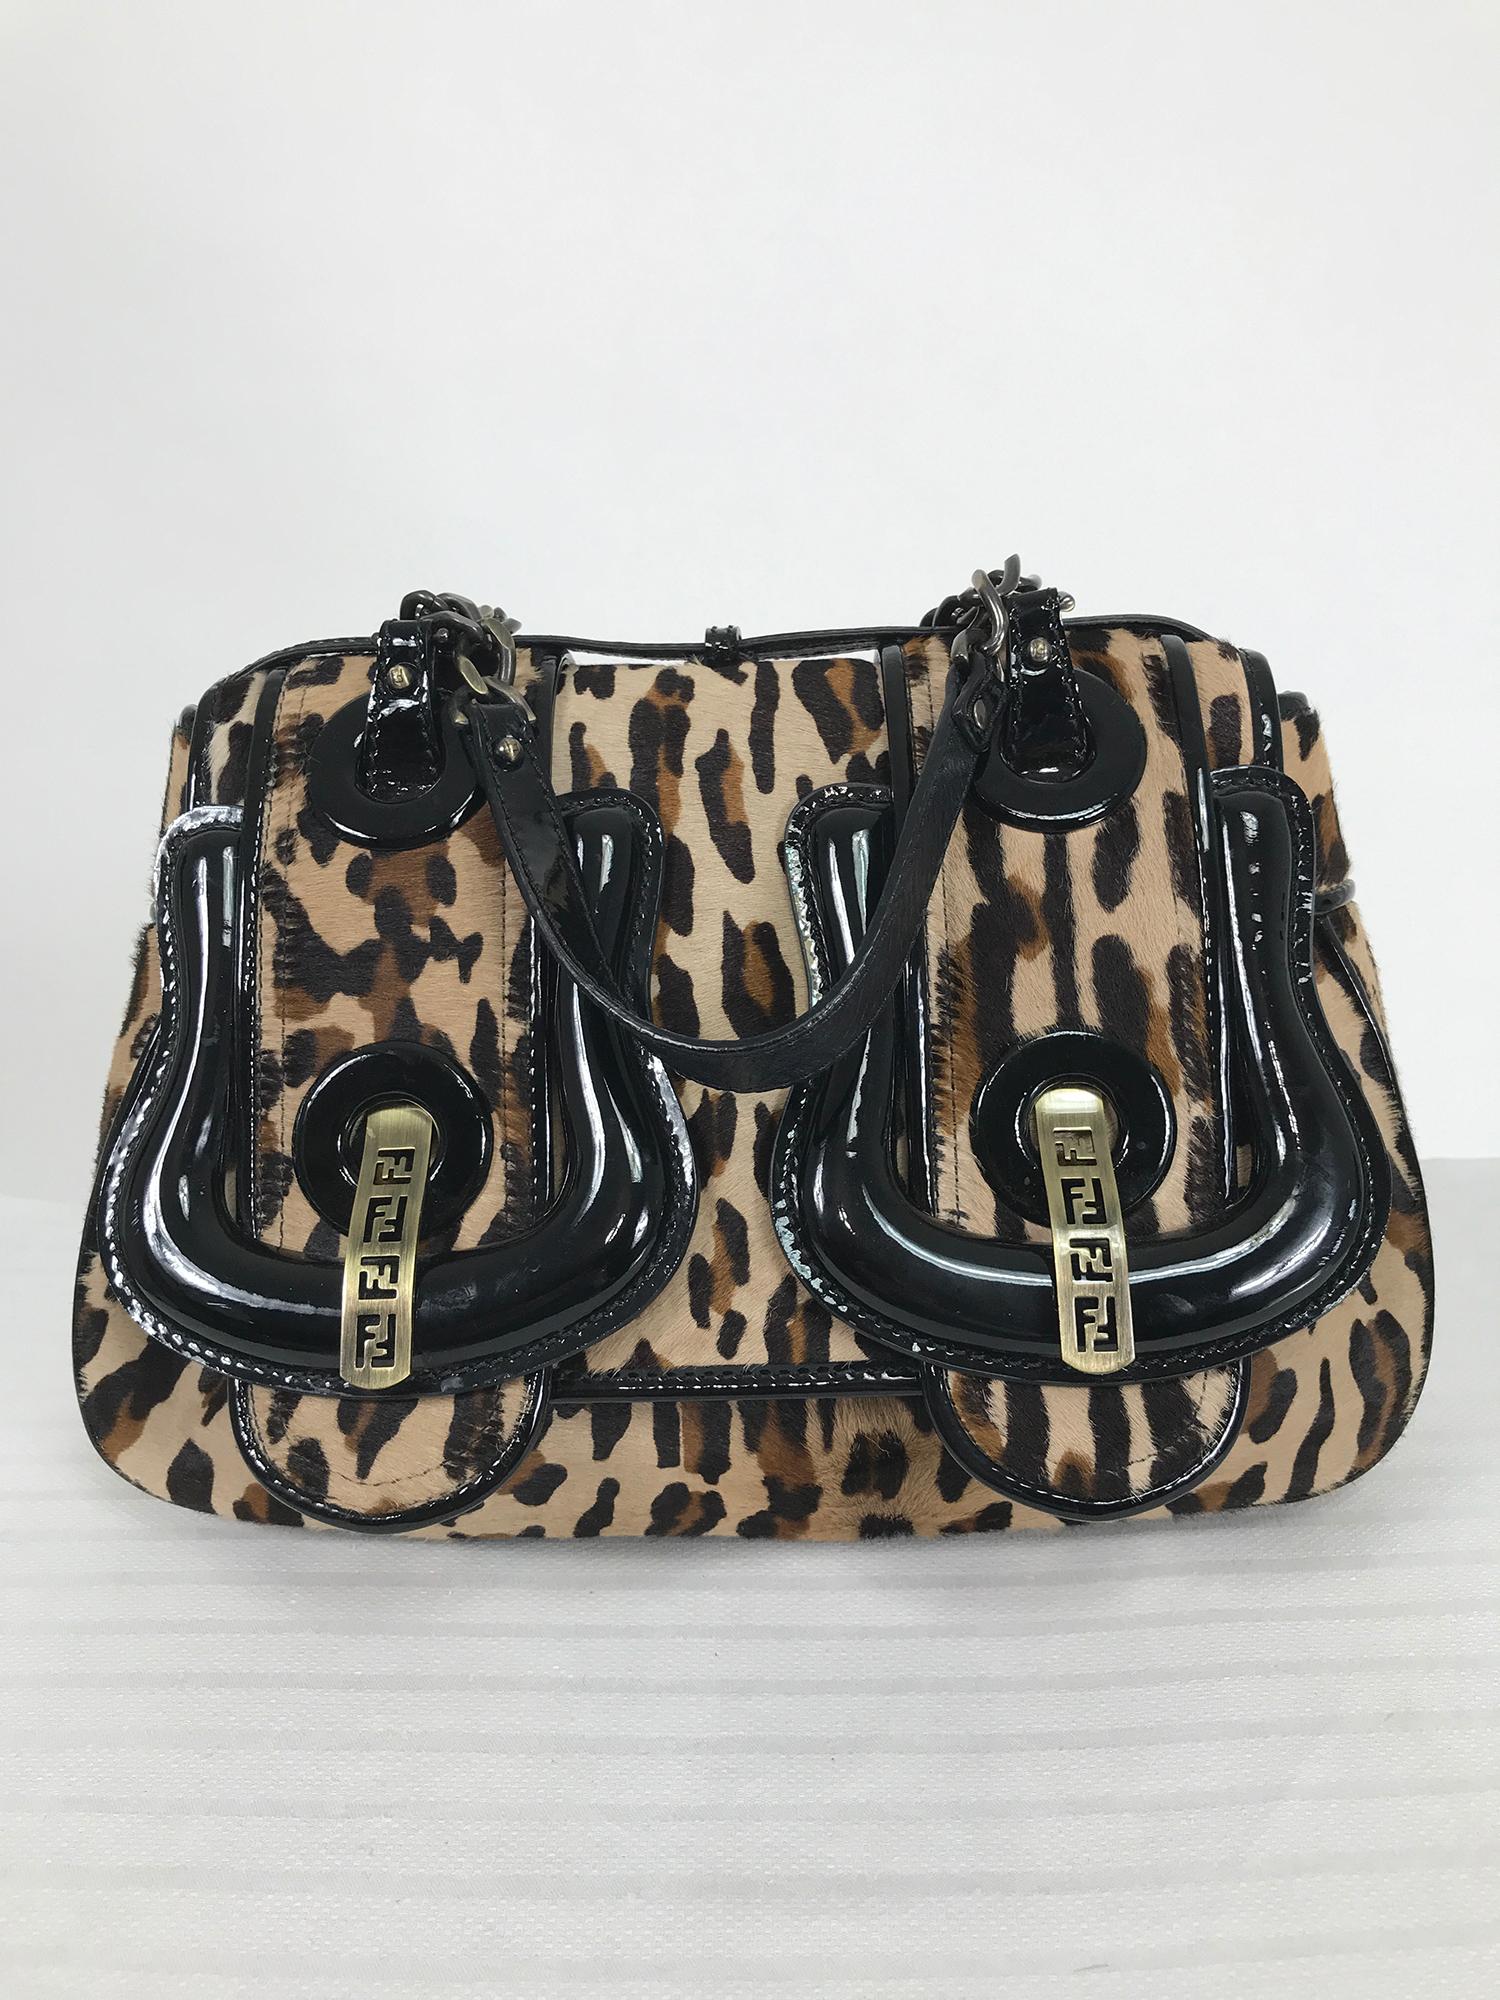 Fendi leopard print calf hair and black patent leather B Bag.  It features luxurious glossy patent leather contrasted with leopard printed calf hair. Double Fendi buckles sit at the front and the chain link shoulder straps complete the look. Flap